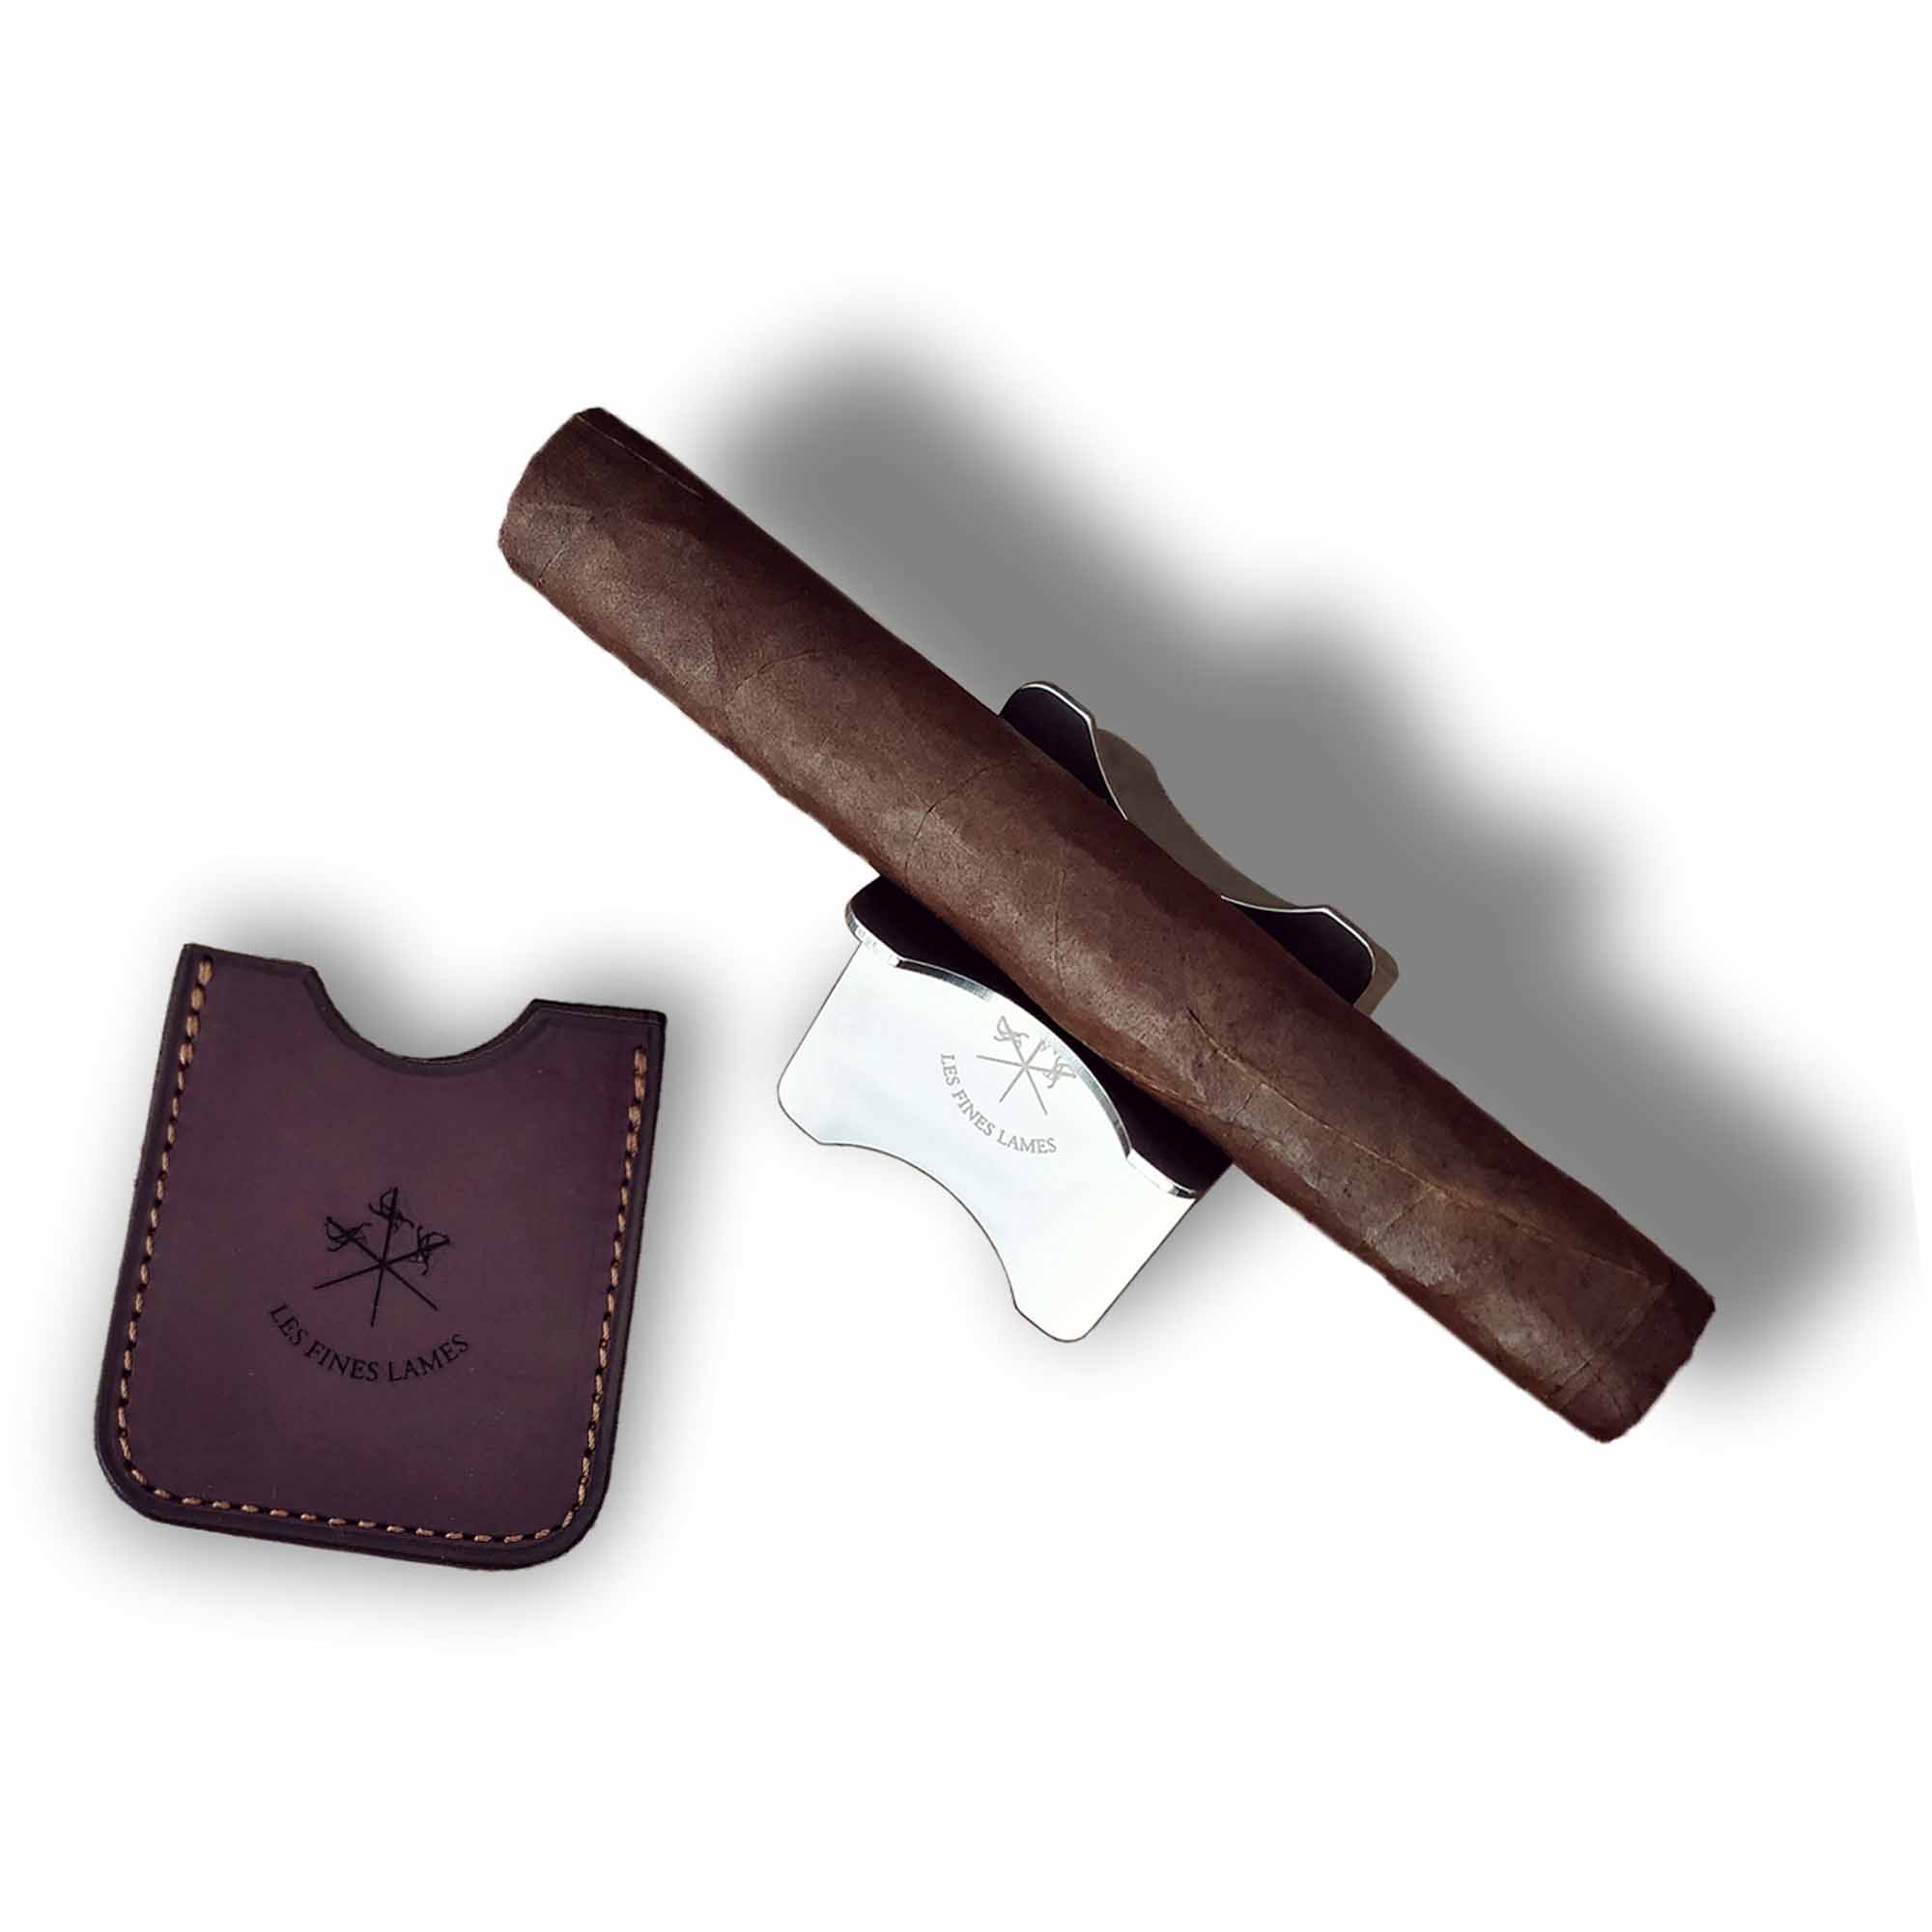 Les Fines Lames Cigar Stand BURGUNDY